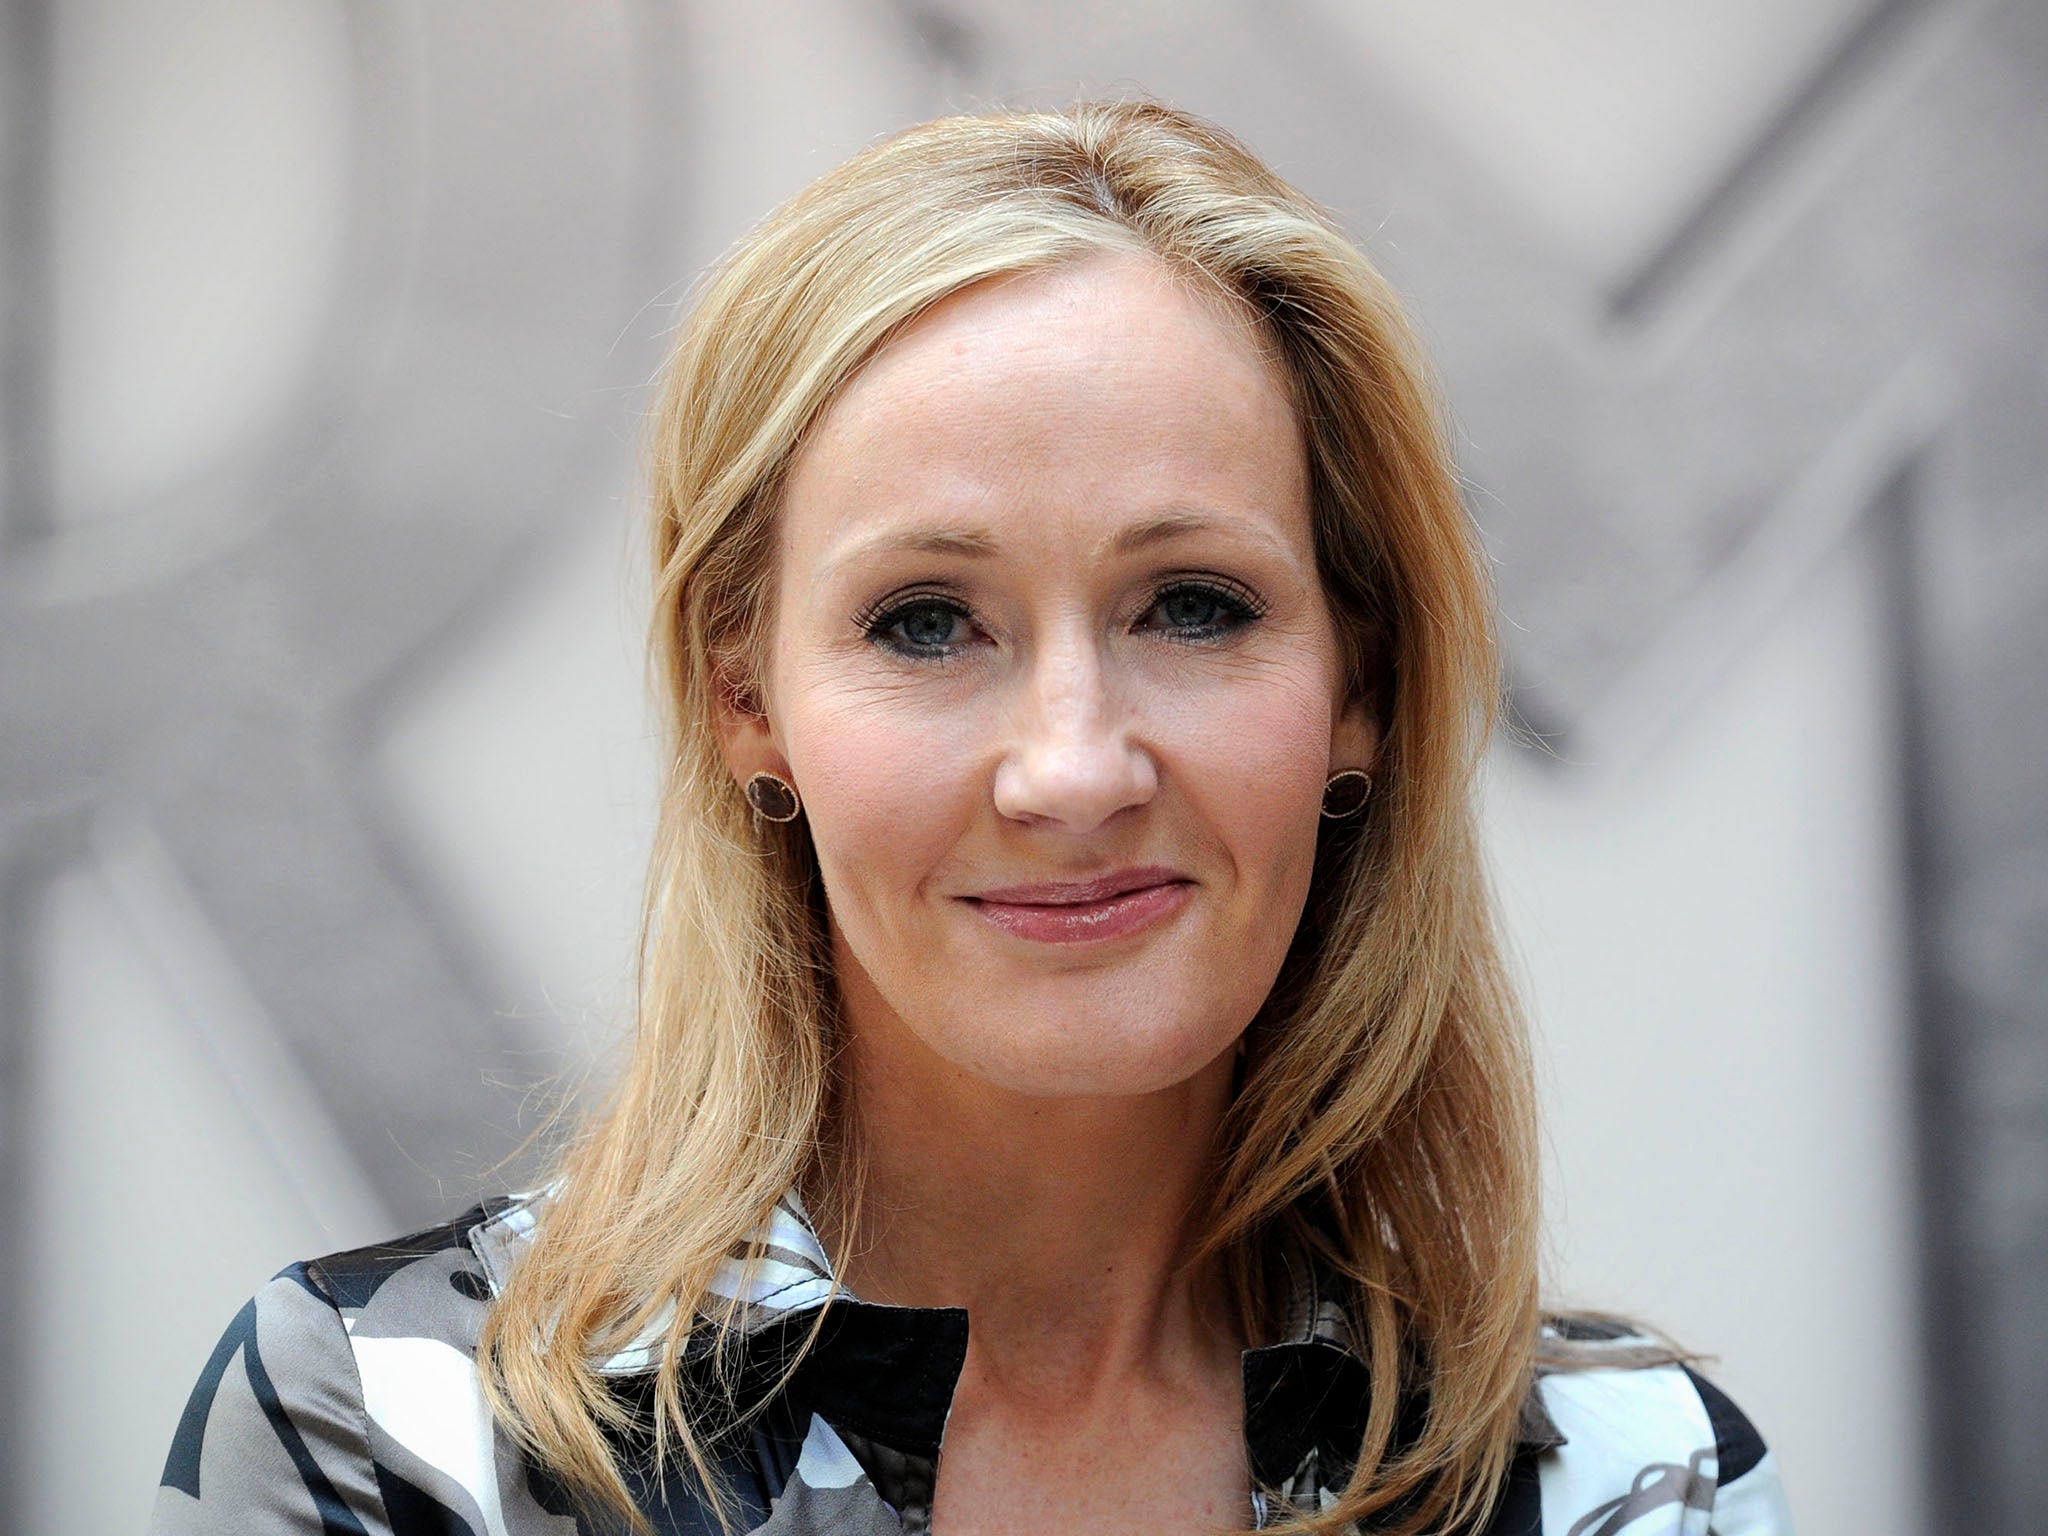 JK Rowling’s final Harry Potter book was published in 2007